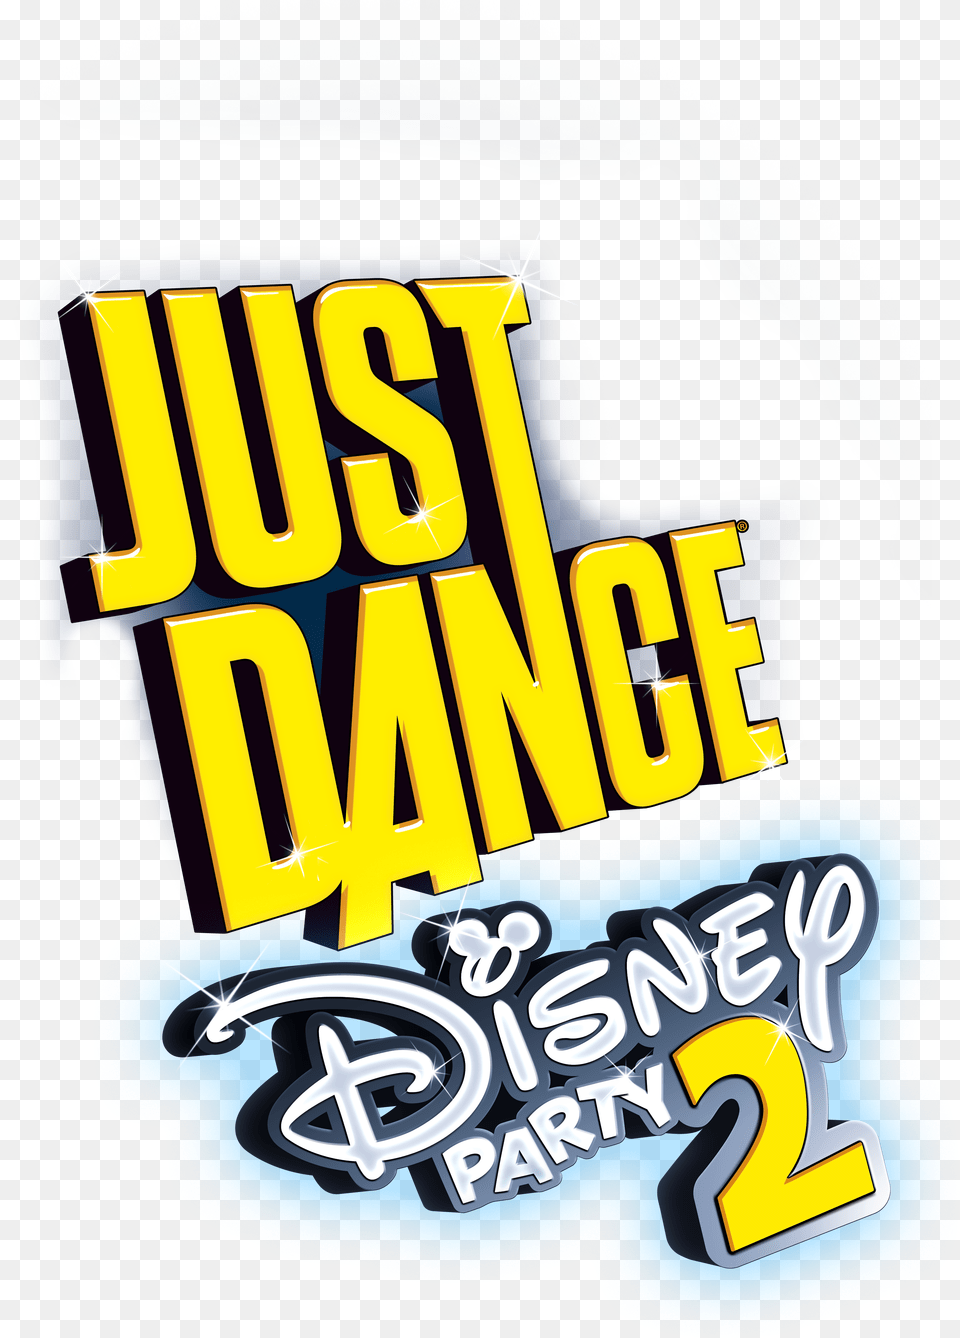 Just Dance Disney Party Details, Advertisement, First Aid, Poster, Logo Png Image